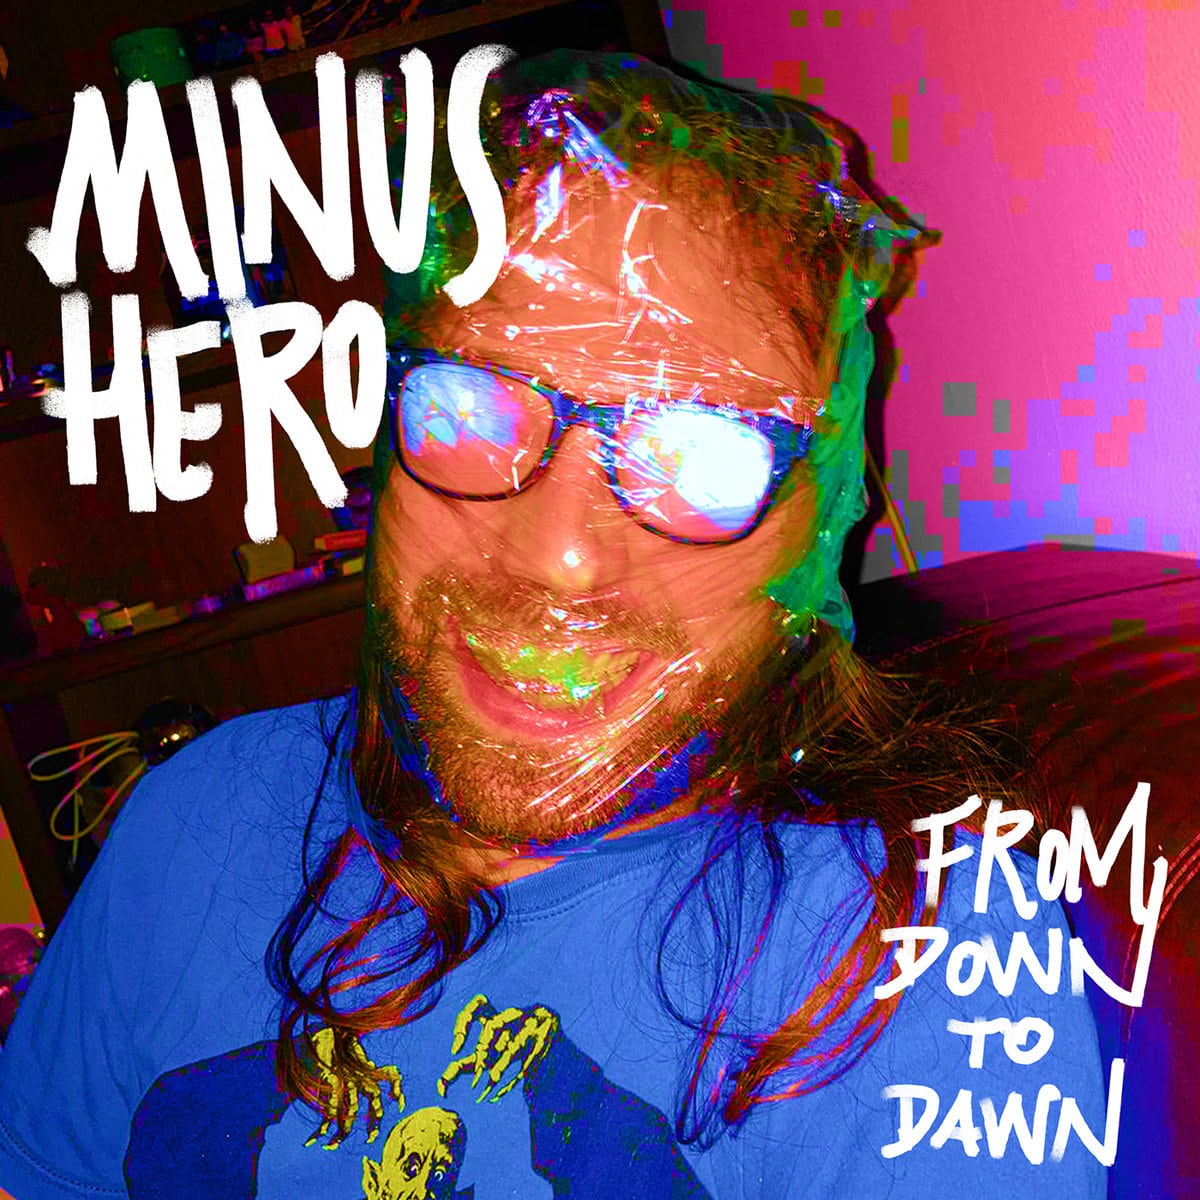 Minus Hero – From Down To Dawn LP (White Russian) Minus Hero is a project born in early 2019 in Rome, Italy but soon after split between Amsterdam and Rome. Their music is inspired by the shoegaze, emo, punk rock and grunge sound of the early 90’s. Despite the distances and the pandemics they have been active and they now arrived to their third LP From Down to Dawn. Sad lyrics as usual but with a sparkle of hope and a bunch of distorted guitars. Due out June 2nd on Punk Rock Radar, White Russian, and Cat’s Claw Records.